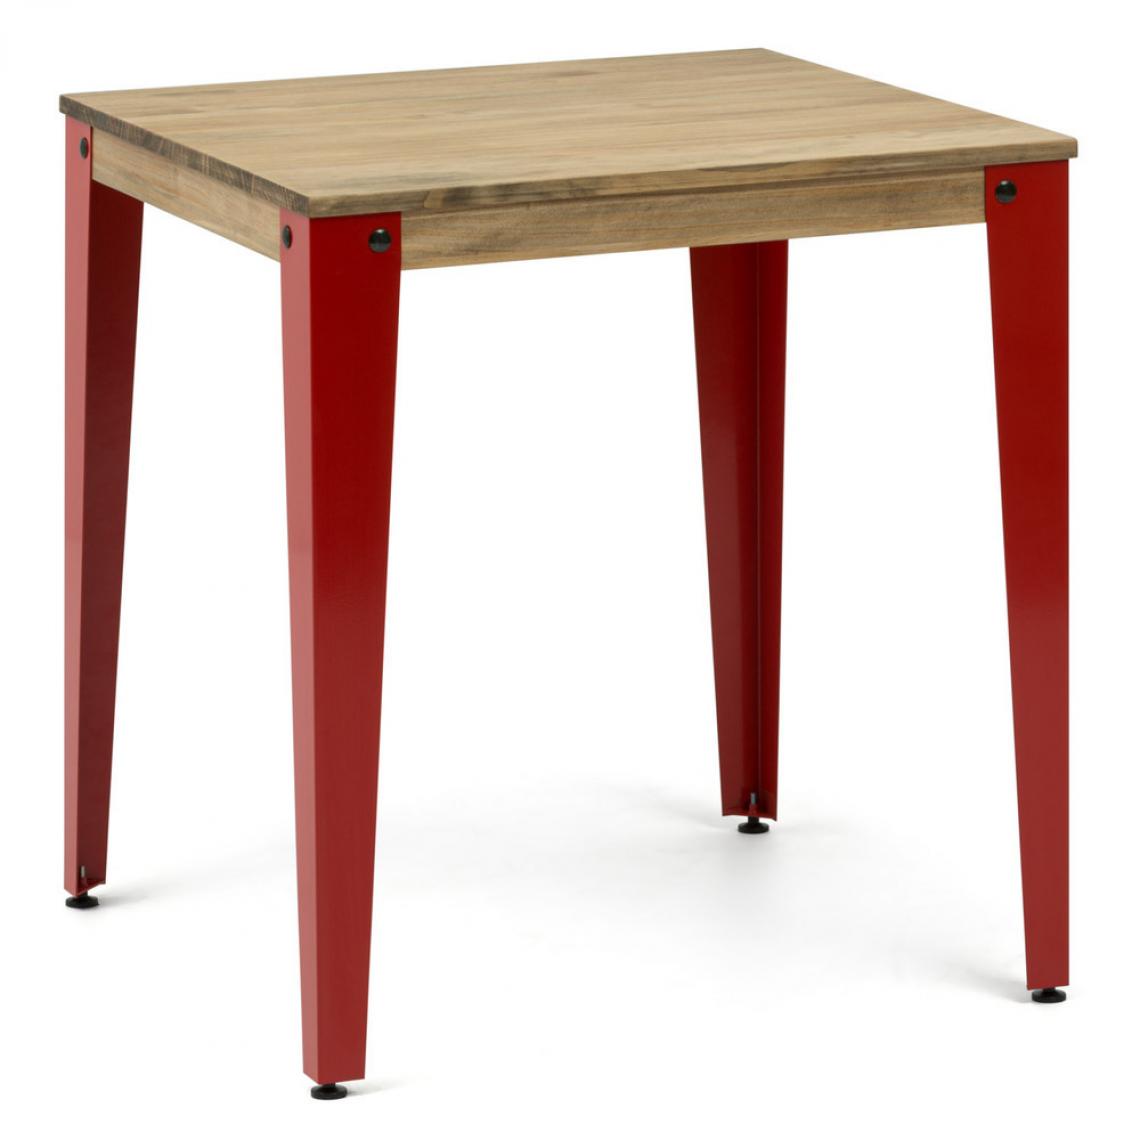 BOX FURNITURE - Table Salle à Manger Lunds 70x70x75cm Rouge-Vieilli Box Furniture - Tables à manger